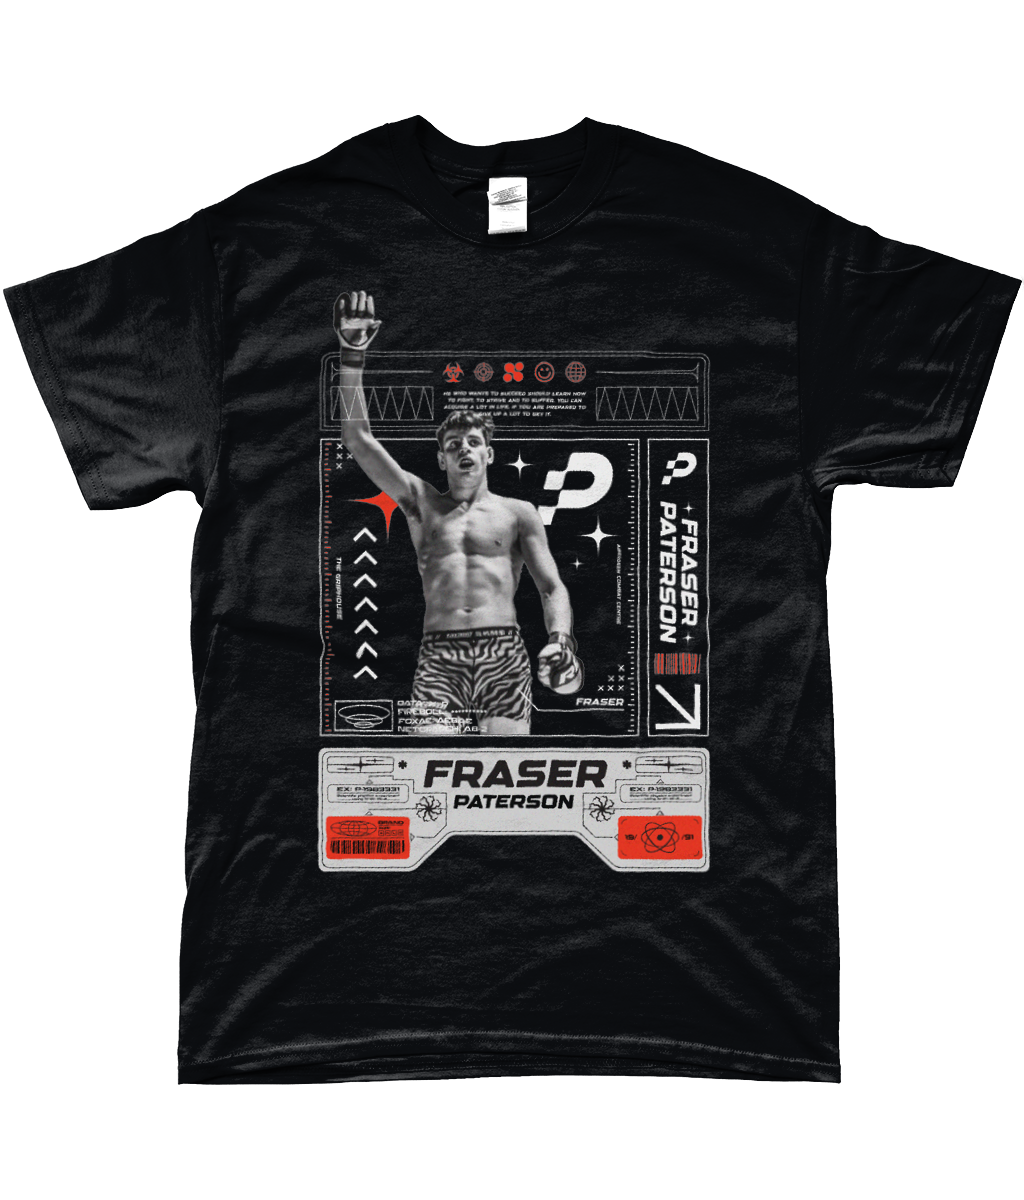 Fraser Paterson Graphic T-Shirt